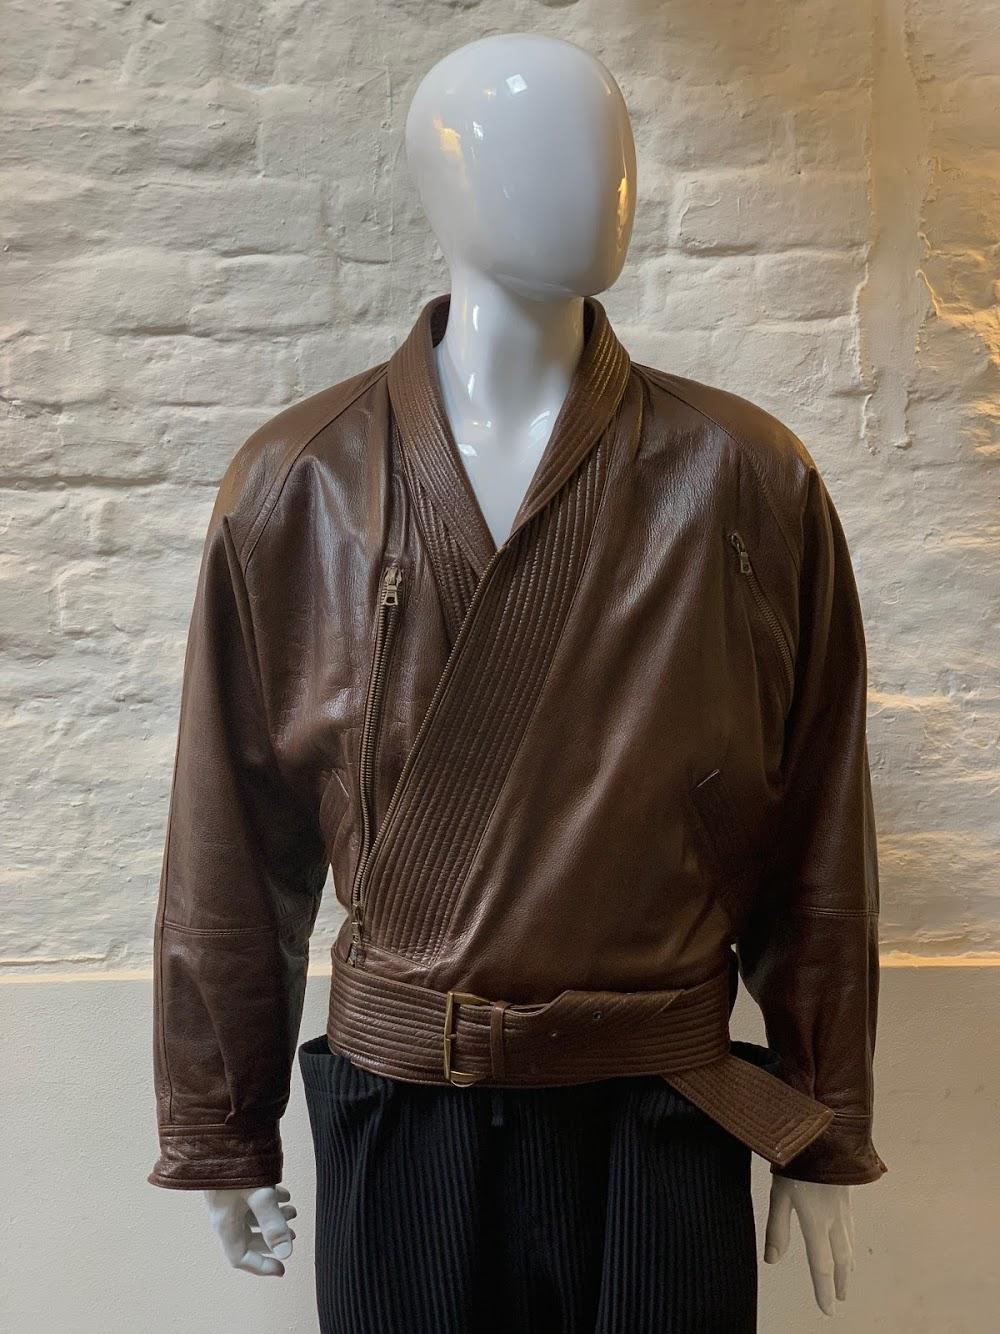 Versace 90s Kimono Wrap Belt Leather Jacket made in Italy from leather. 

Founded in 1978 in Milan, Gianni Versace S.r.l. is one of the leading international fashion design houses and a symbol of Italian luxury world-wide. A sleek combination of